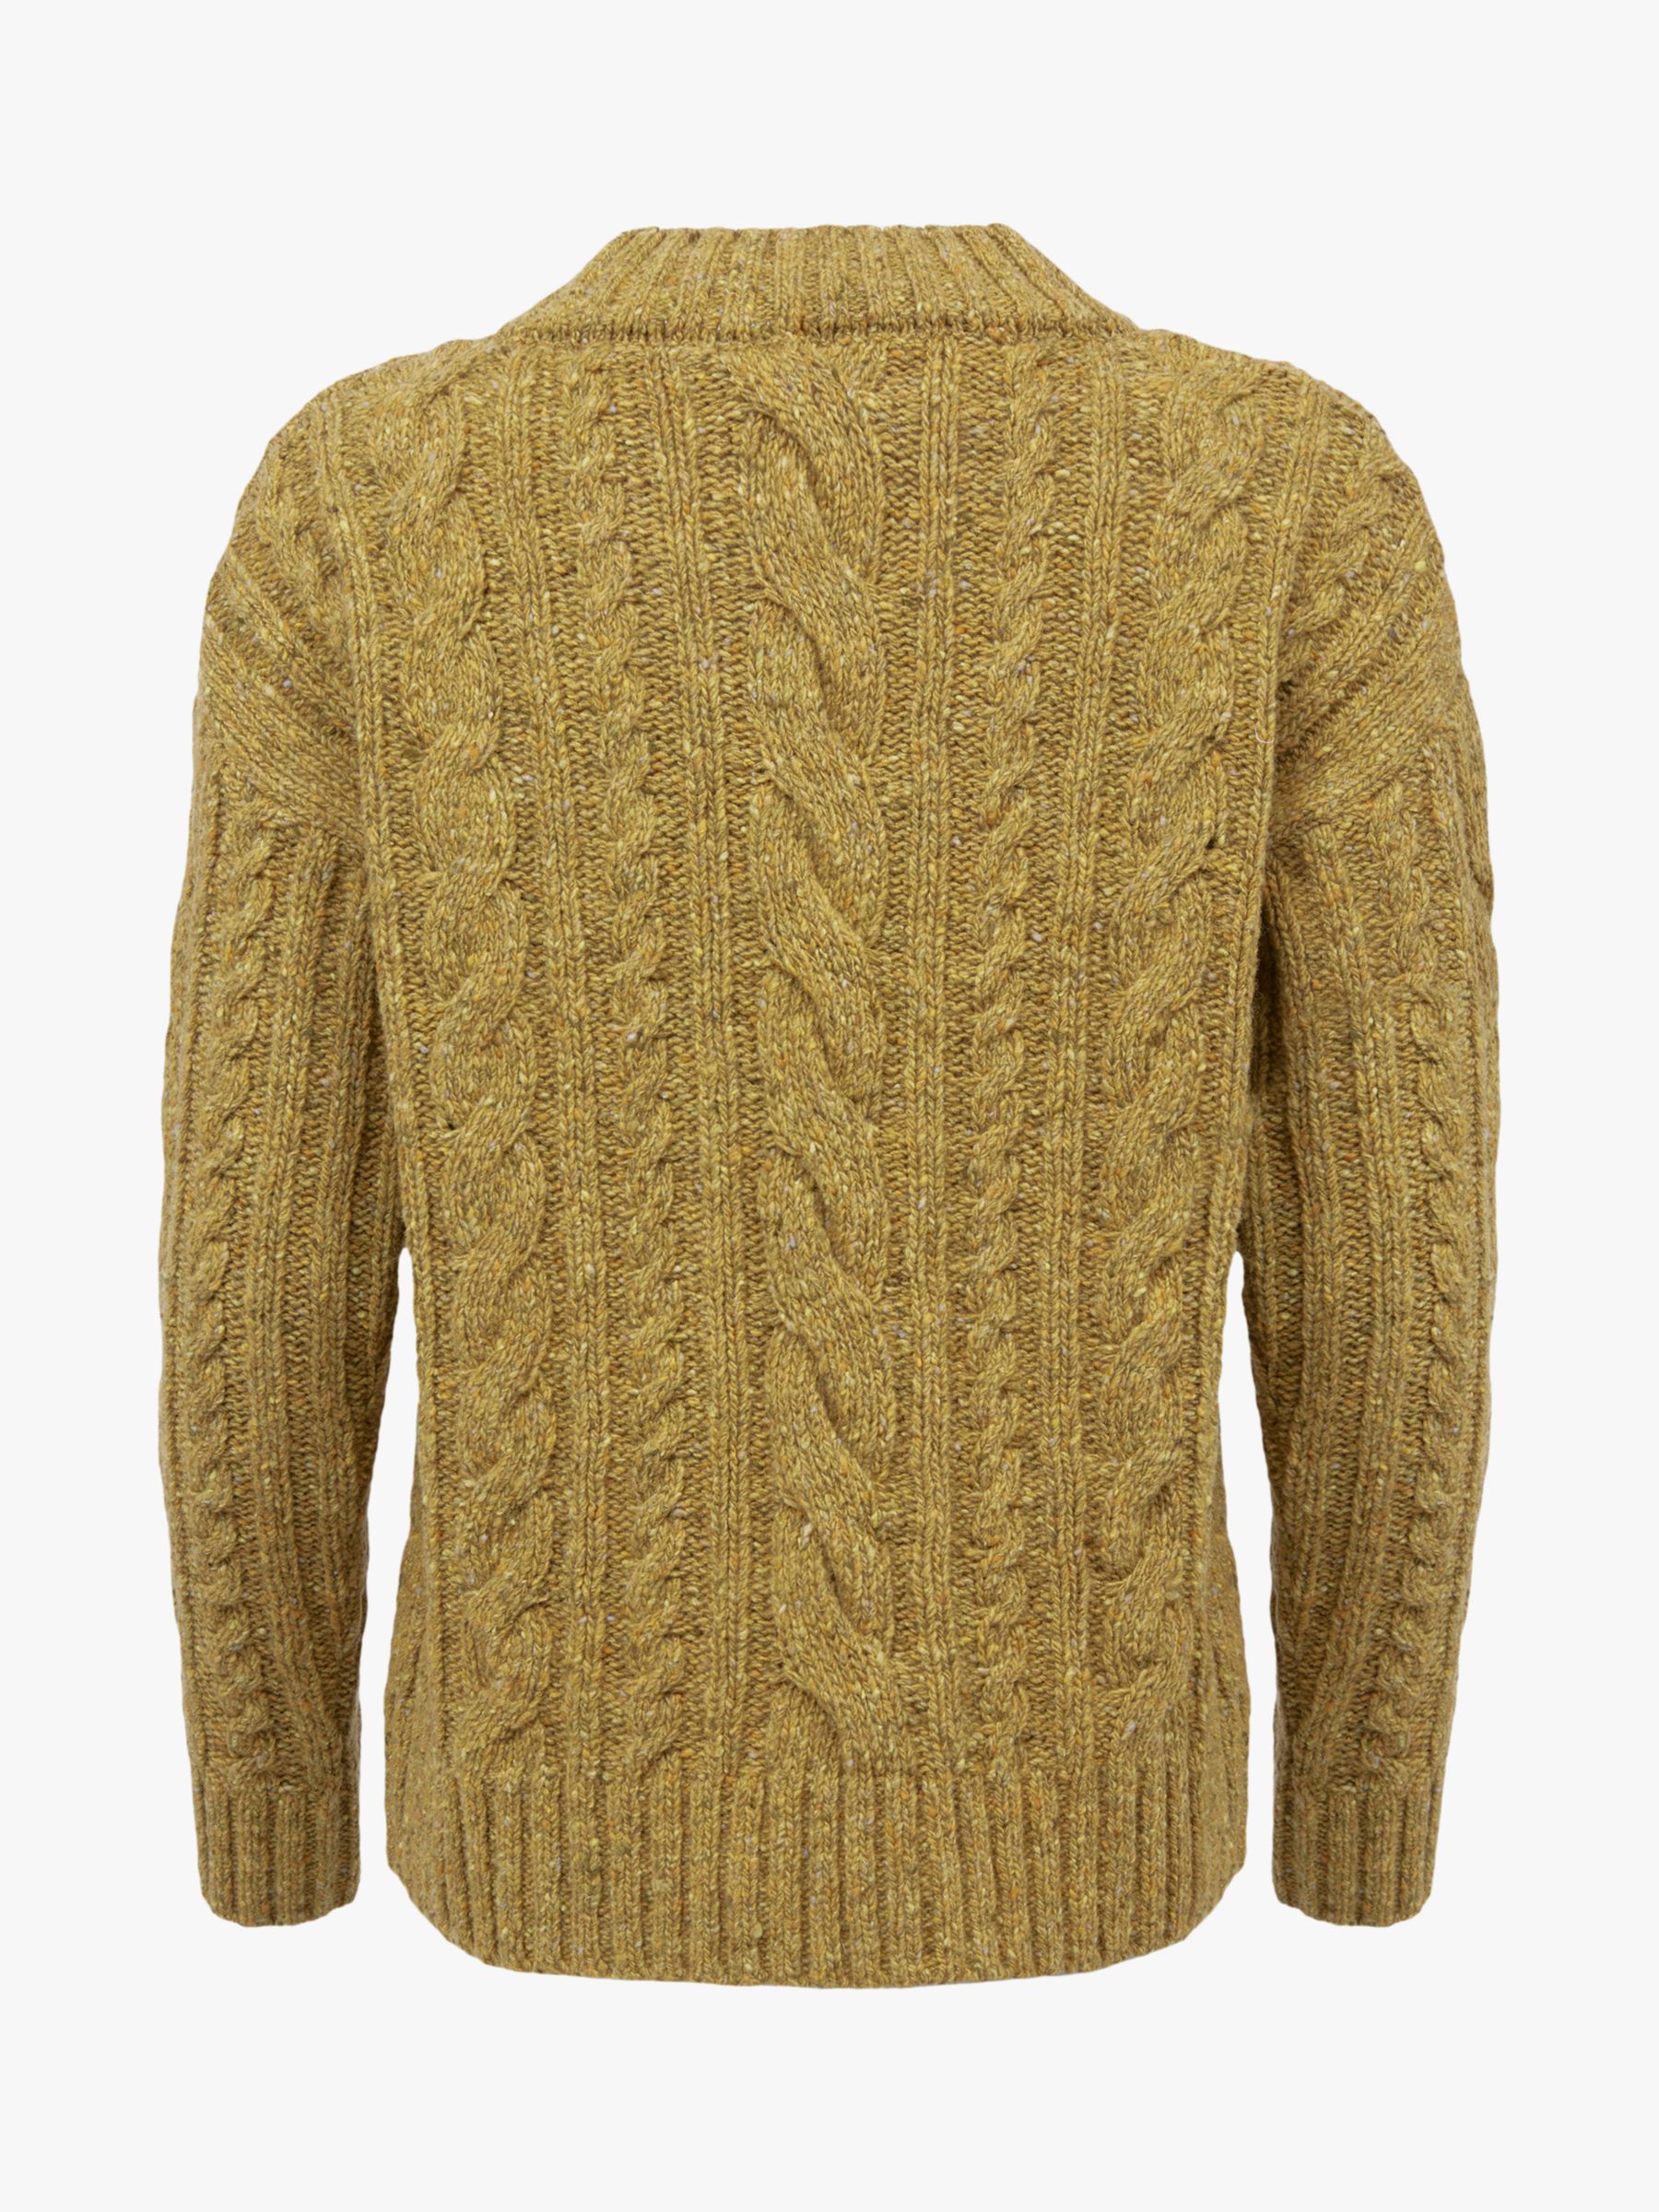 Buy Celtic & Co. Donegal Cable Crew Jumper Online at johnlewis.com